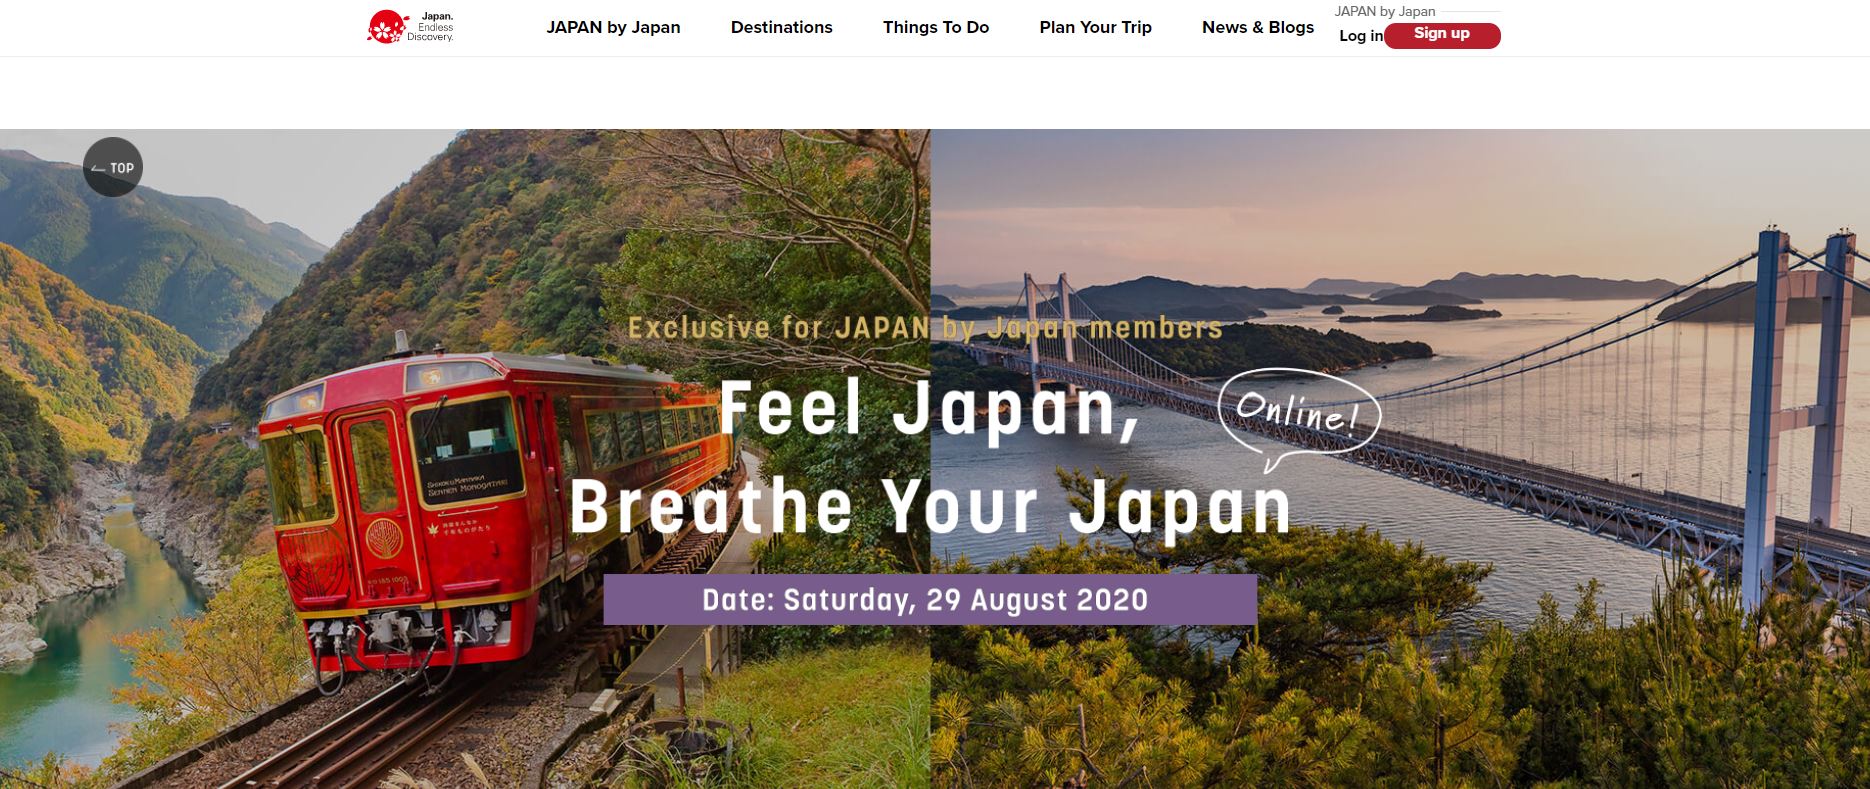 JAPAN by Japan online event